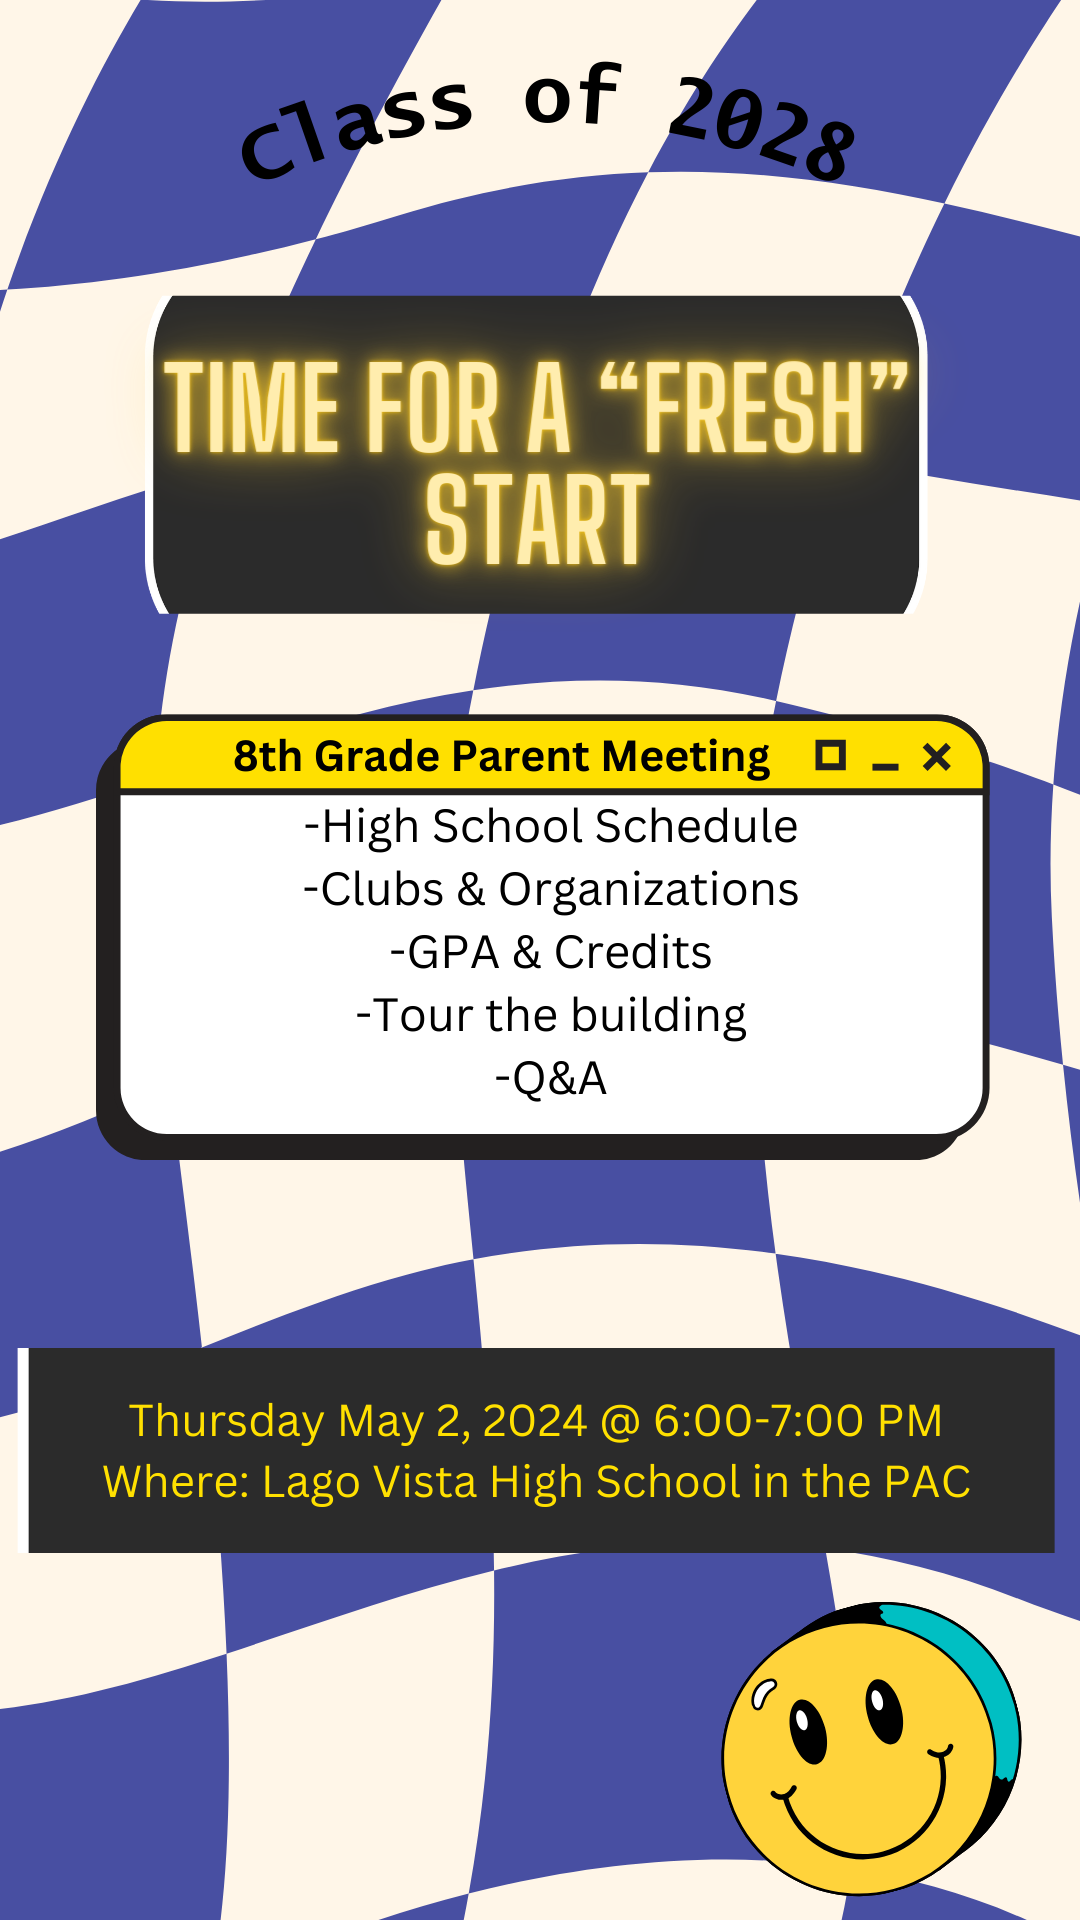 Join the high school counselors in the PAC to get answers to all your questions about entering high school. We will go over schedules, clubs & organizations, GPA, credits, and take a tour of the beautiful LV High School campus. Thursday, May 2, 2024 beginning at 6pm in the Performing Arts Center at LVHS.